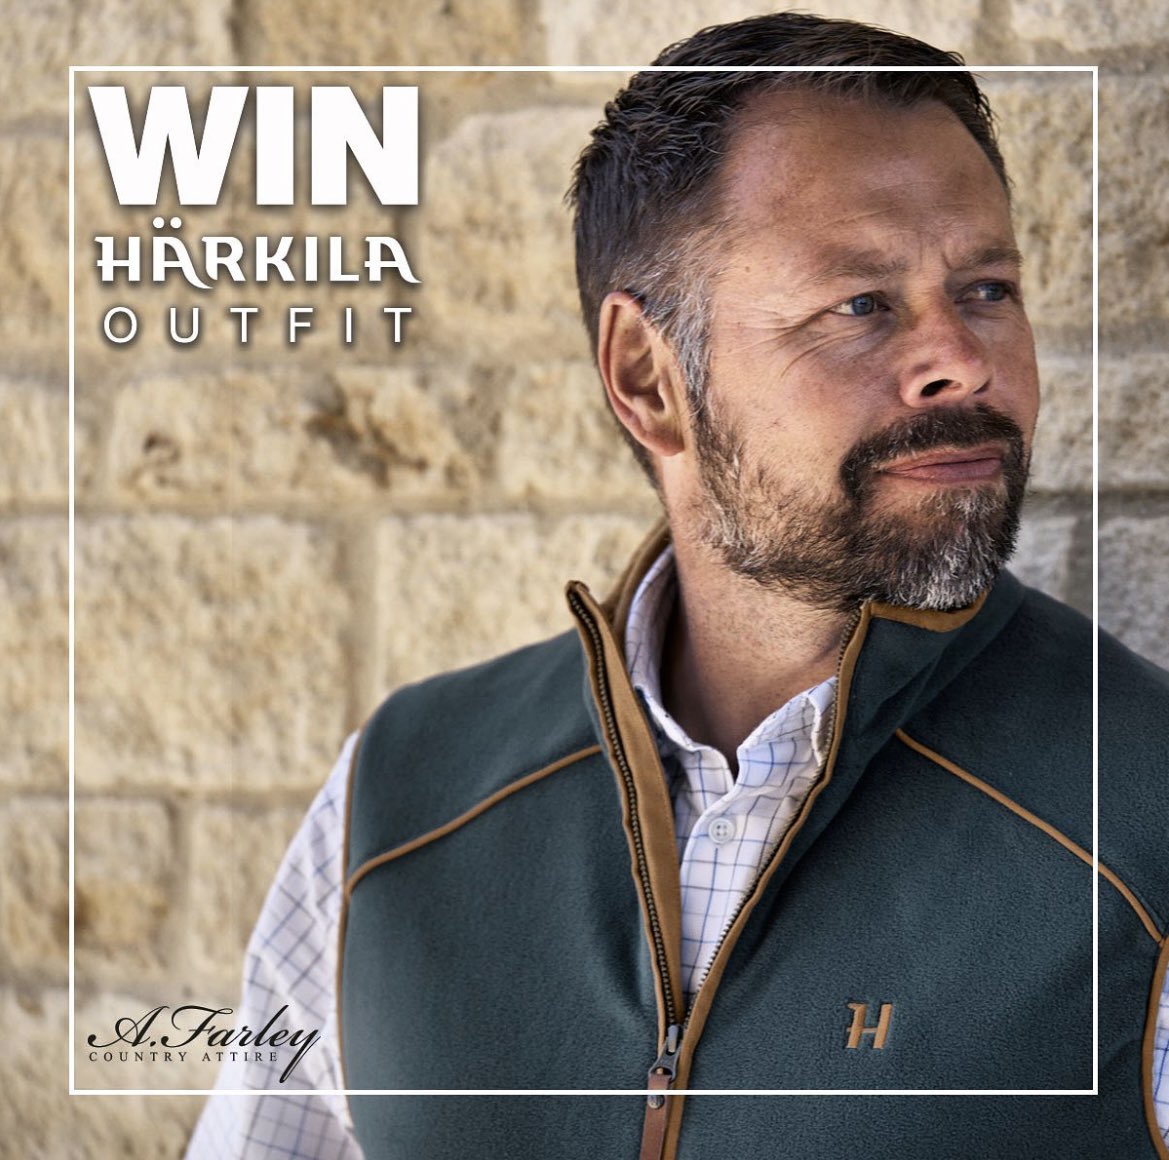 ⭐️HARKILA GIVEAWAY WORTH £375⭐️ Giveaway includes; -Harkila Sandhem Fleece -Harkila Retrieve Shirt -Harkila Asmund Trousers -Harkila Pro Hunter 2.0 Socks To enter; 1) Follow our page & like this post 2) Re-share this post ✨ Ends Friday 29th Sept #Giveaway